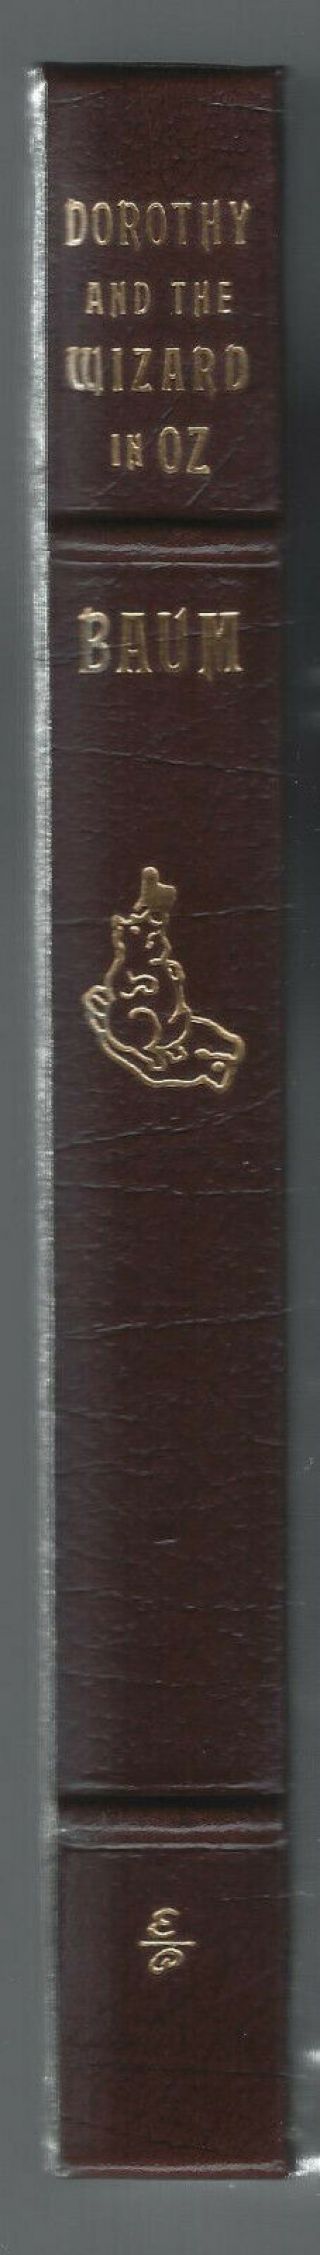 DOROTHY AND THE WIZARD IN OZ - L.  FRANK BAUM,  Easton Press Leather 2